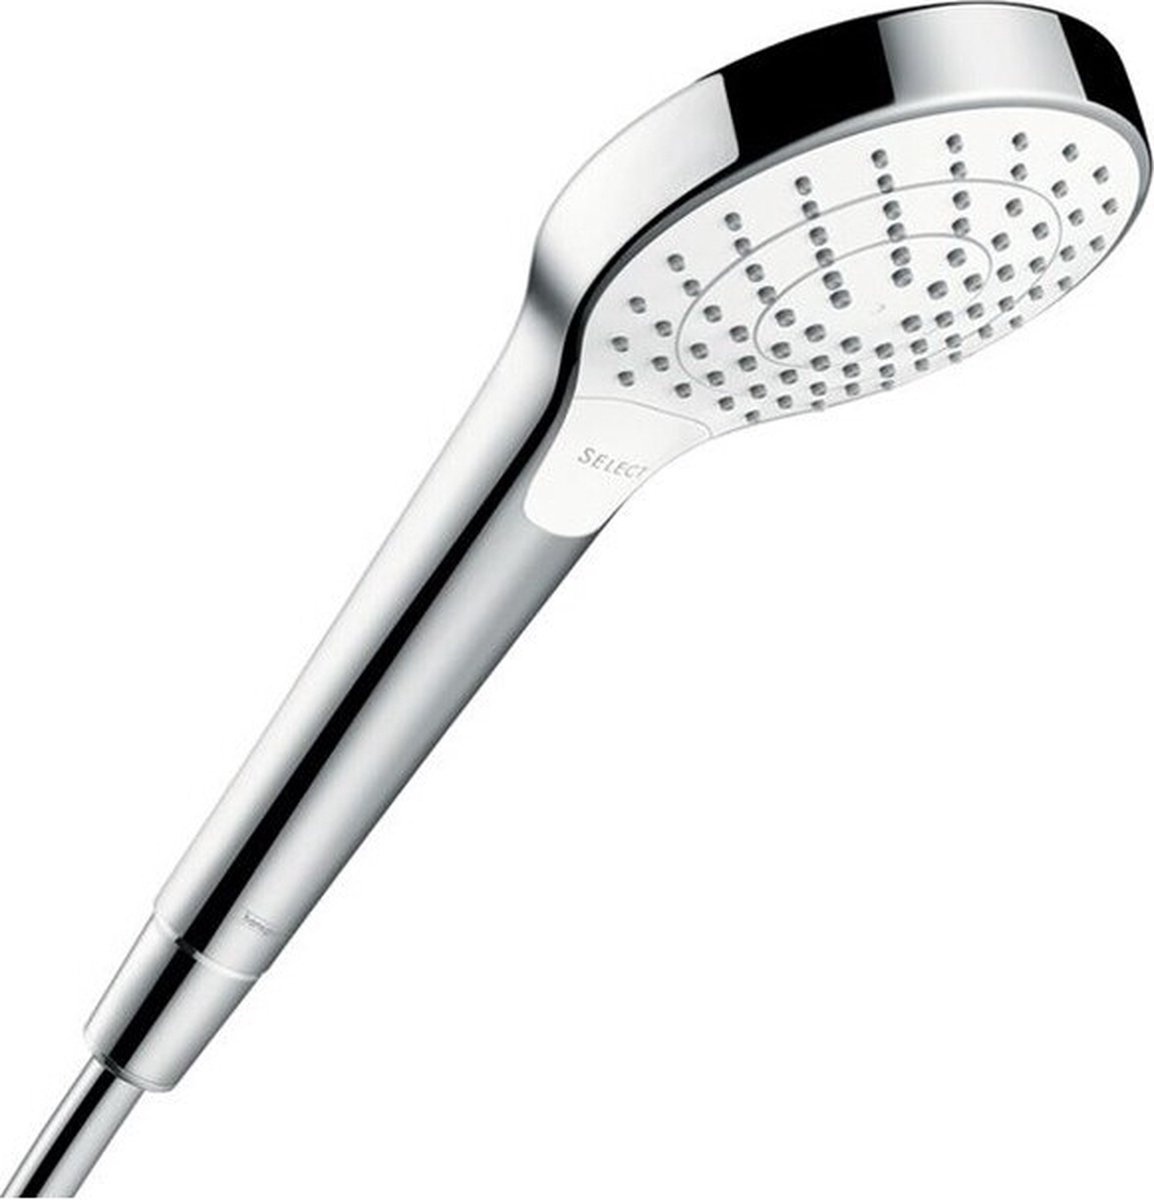 hansgrohe Croma Select S handdouche vario wit/chroom - Hansgrohe